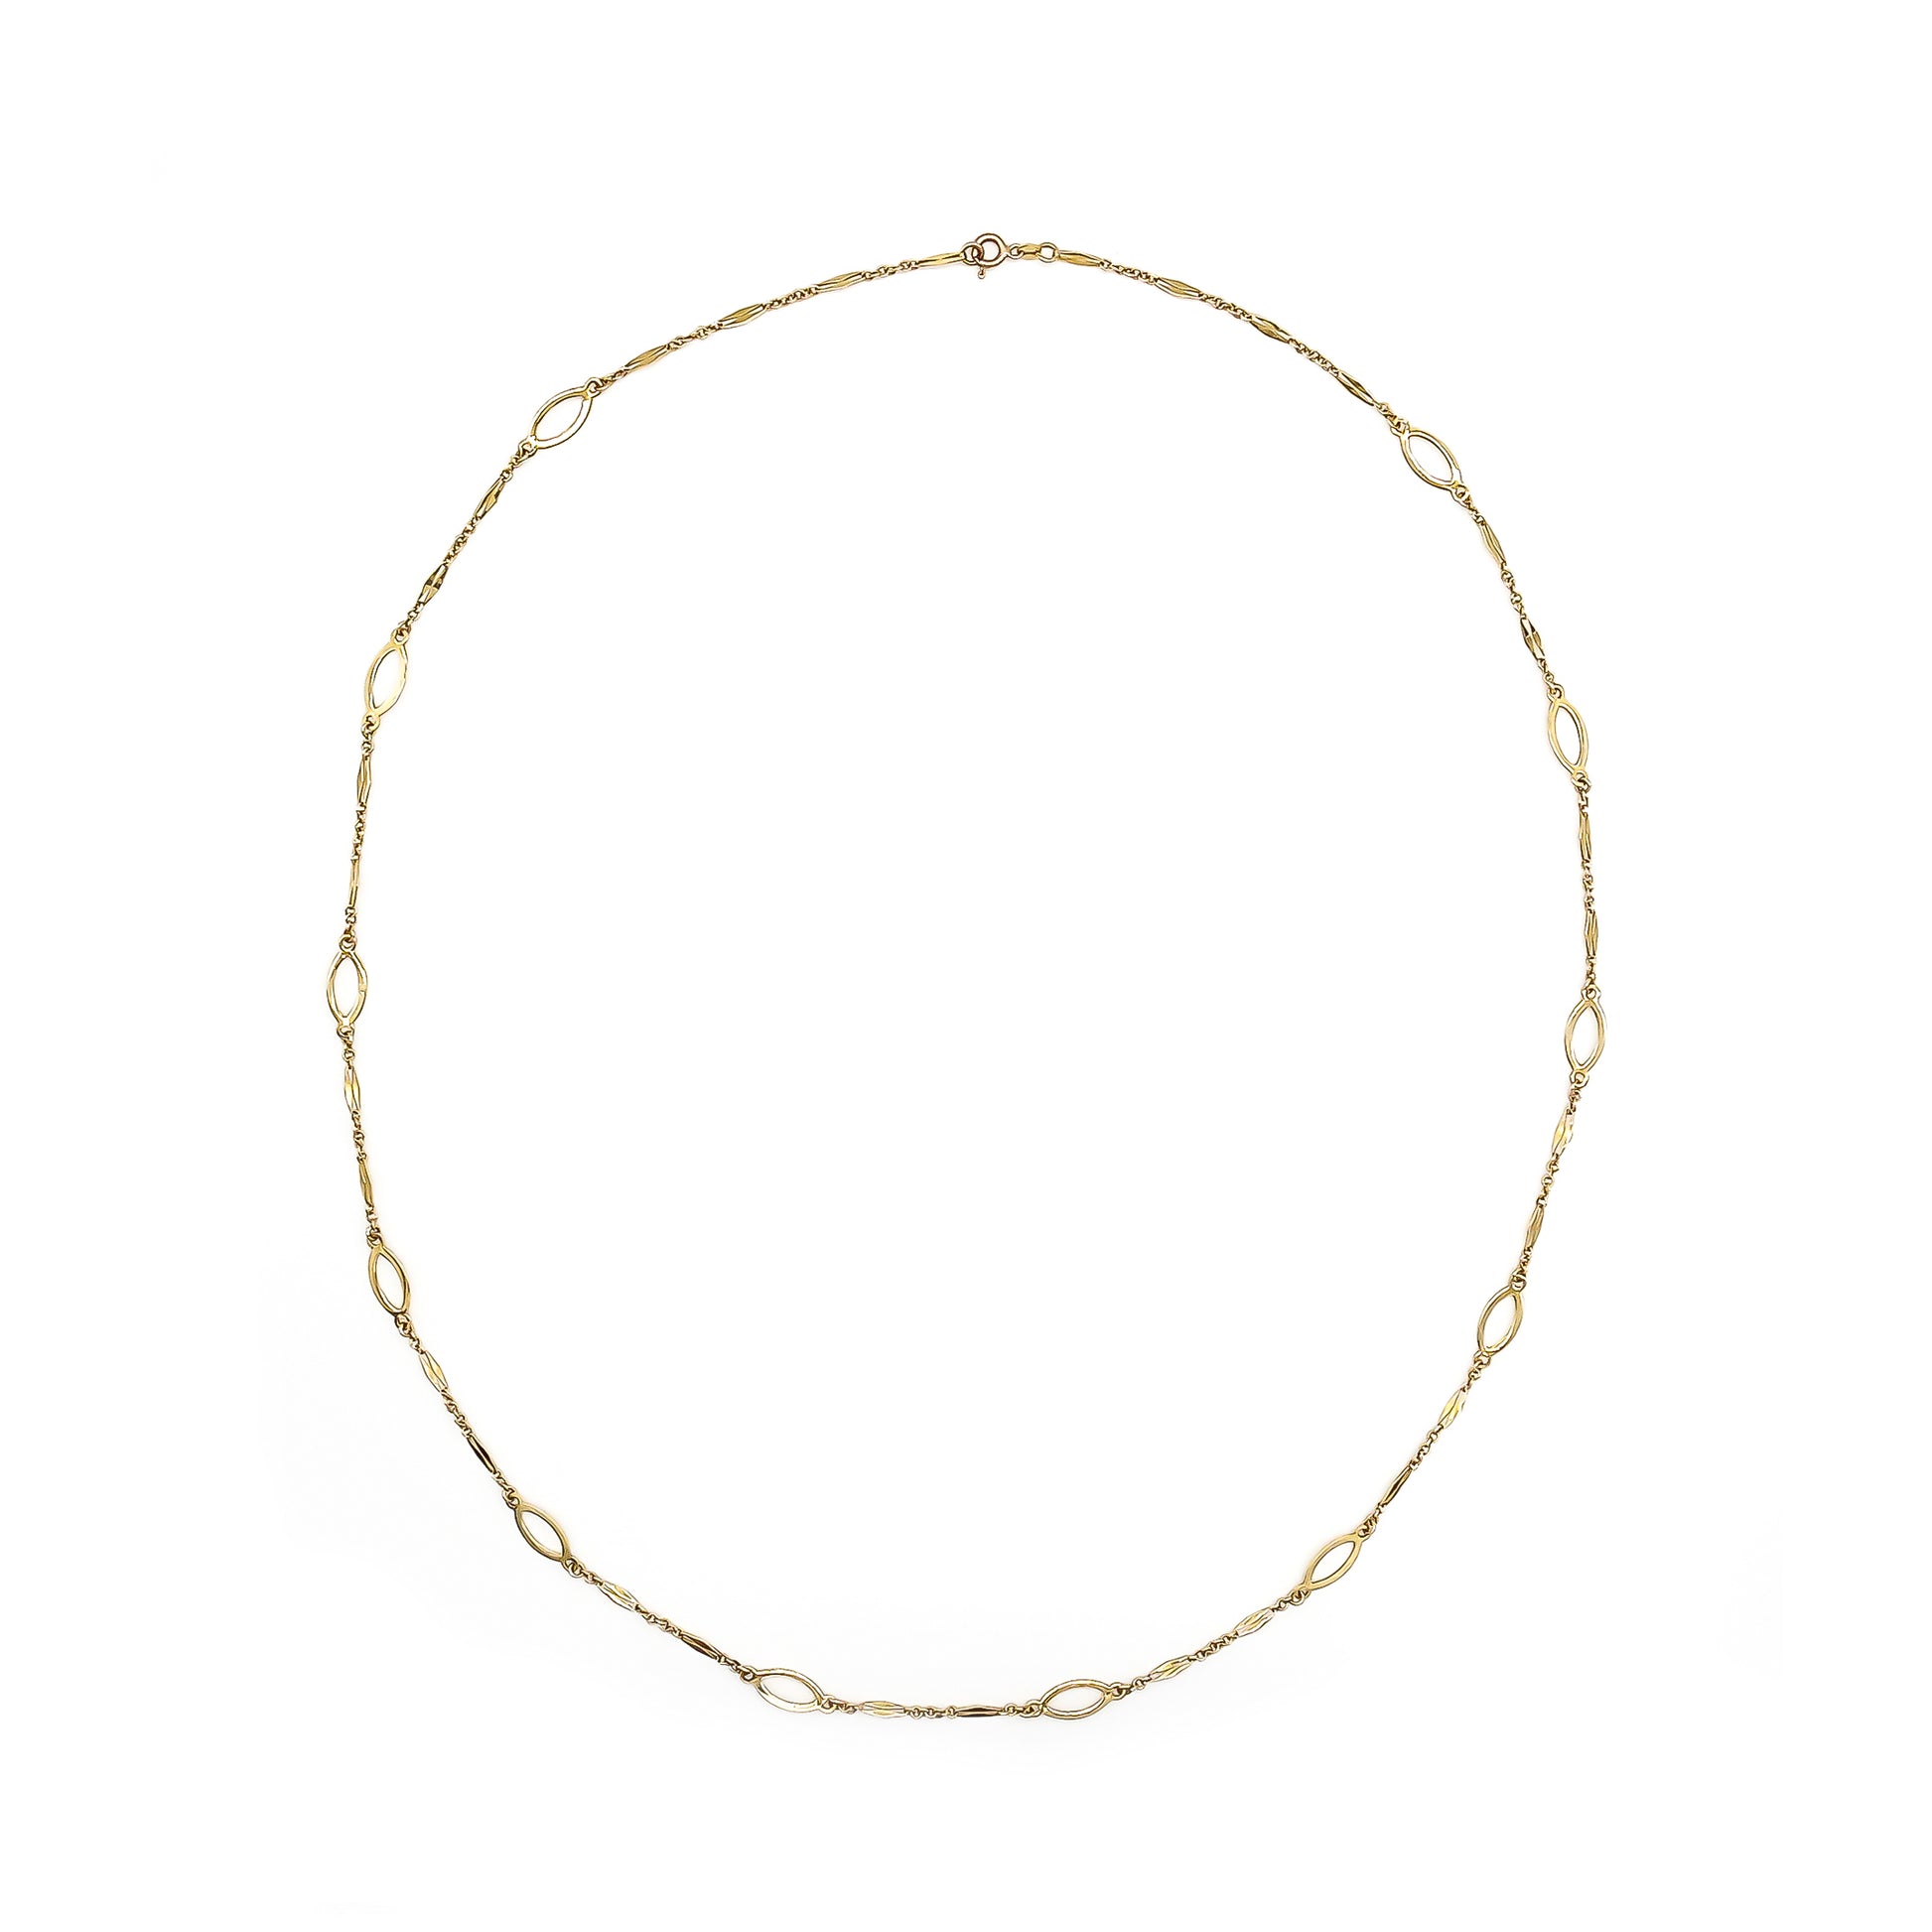 Stylish vintage 14ct yellow gold opera length necklace with fancy links.